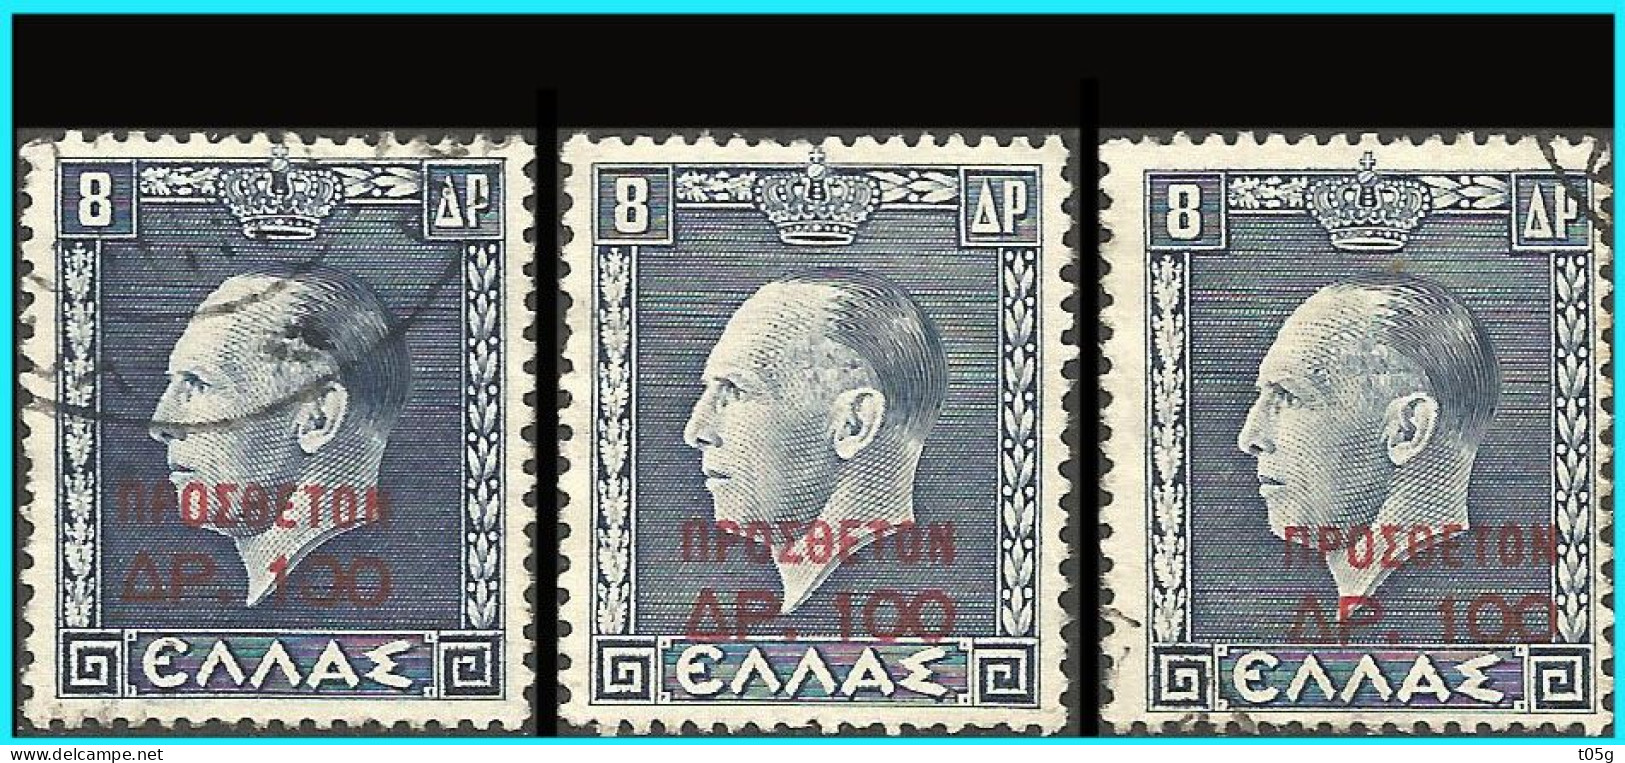 GREECE-GRECE- 1951: (three Overprints In Three Different Positions,from Left To Right) Charity Stamps Used - Charity Issues